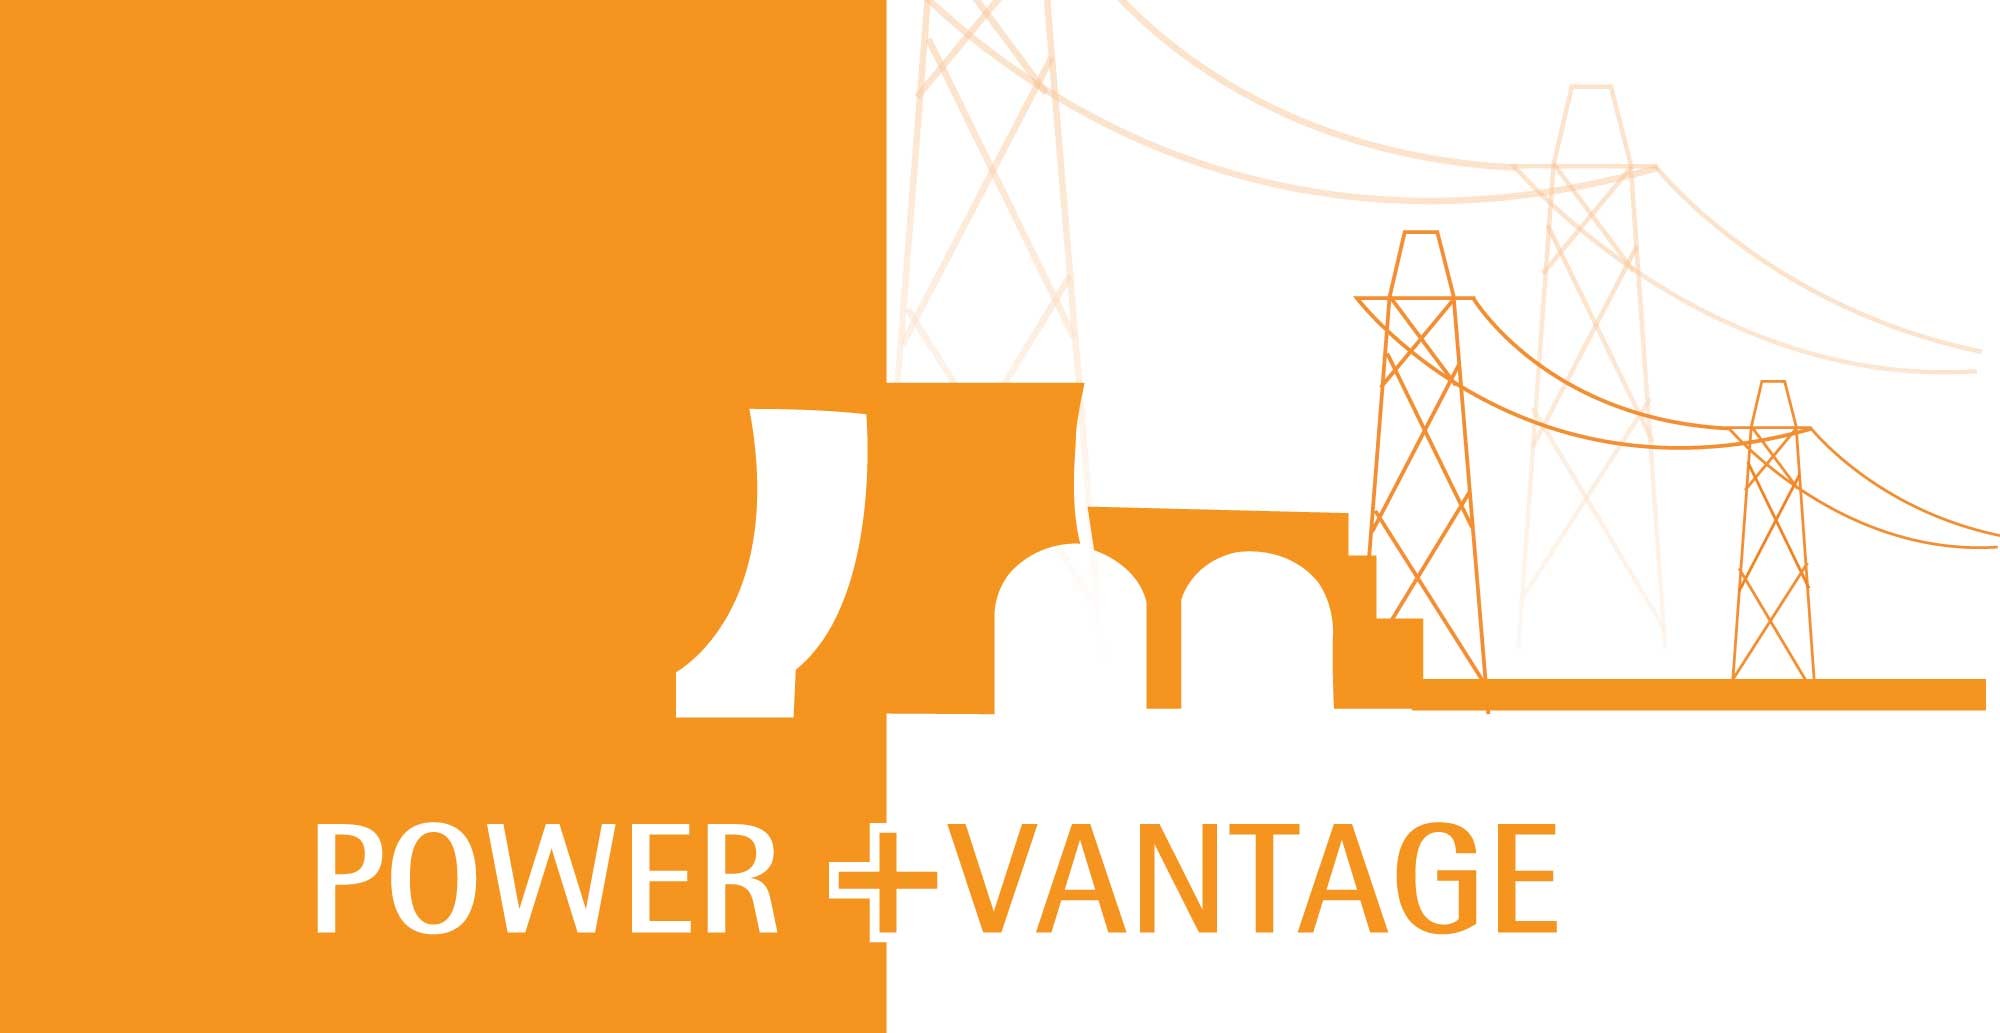 POWER +VANTAGE – The turnaround story of Indian power sector